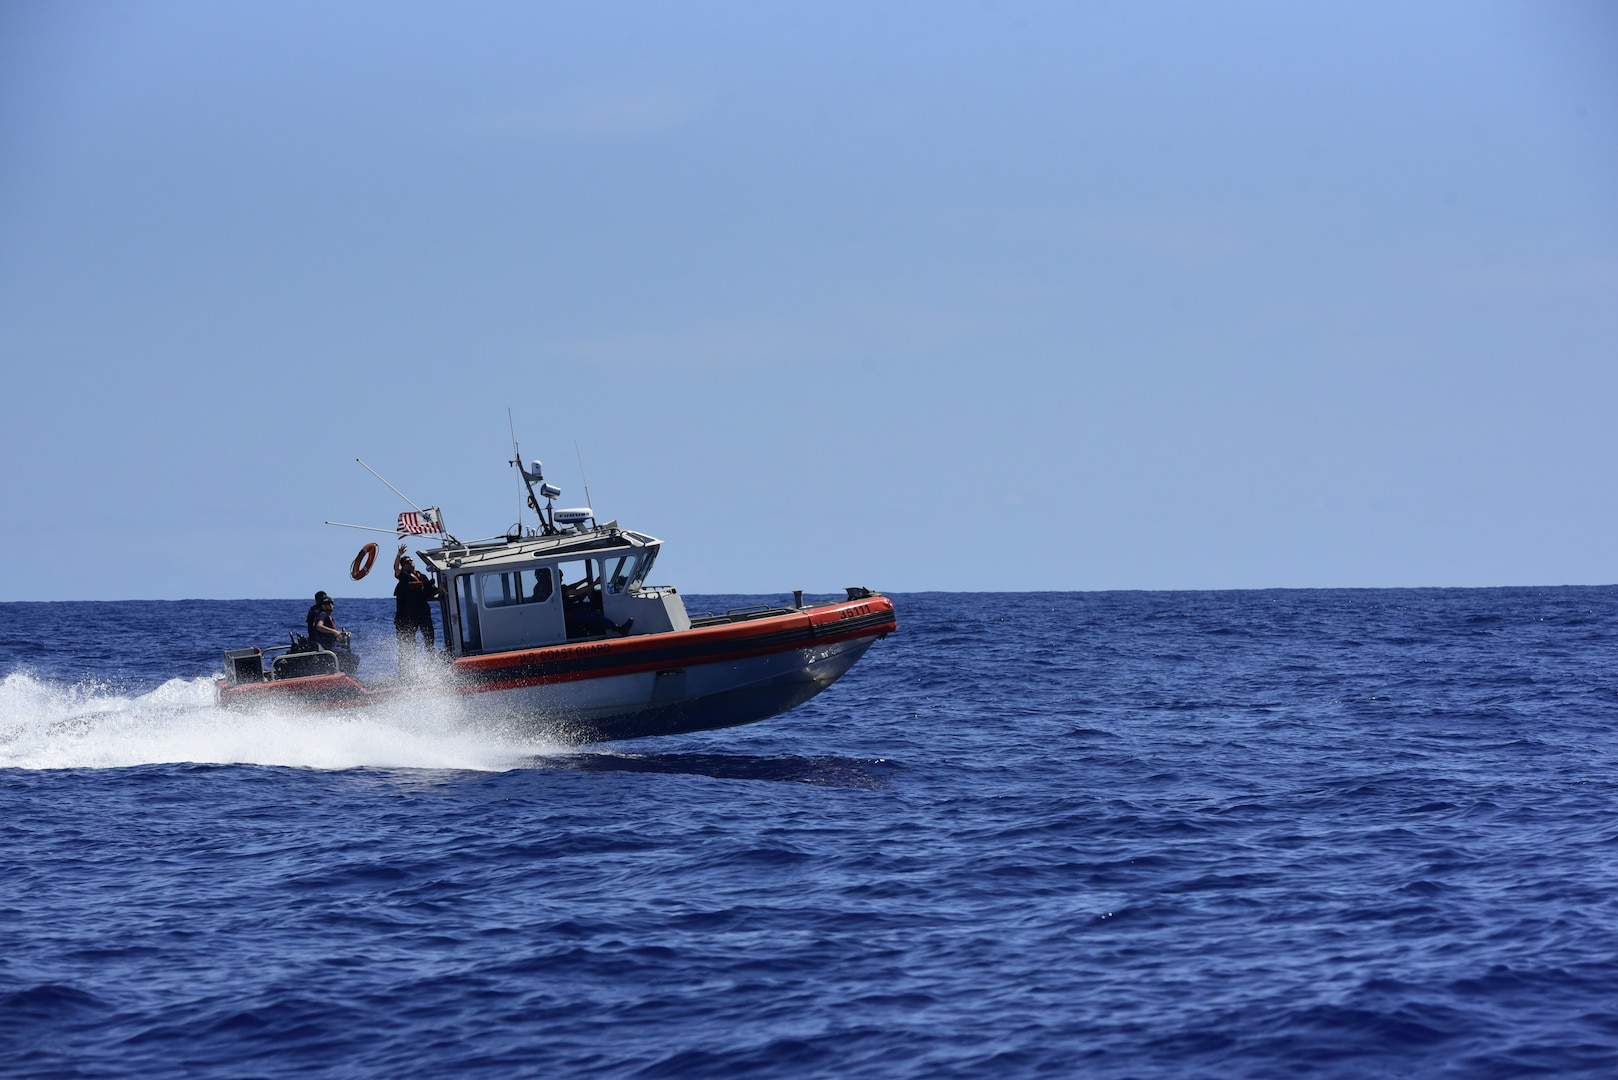 A 35-foot Long-Range Interceptor-II (LRI) cutter boat crew trains for a man- overboard scenario in the vicinity of U.S. Coast Guard Cutter Stratton (752), west of Hawaii, while deployed on a Western Pacific patrol April 20, 2023. Stratton deployed to the Western Pacific to conduct planned, collaborative engagements with ally and partner nations intent on preserving a rules-based order in the Indo-Pacific maritime domain. (U.S. Coast Guard photo by Petty Officer 2nd Class Michael Clark)